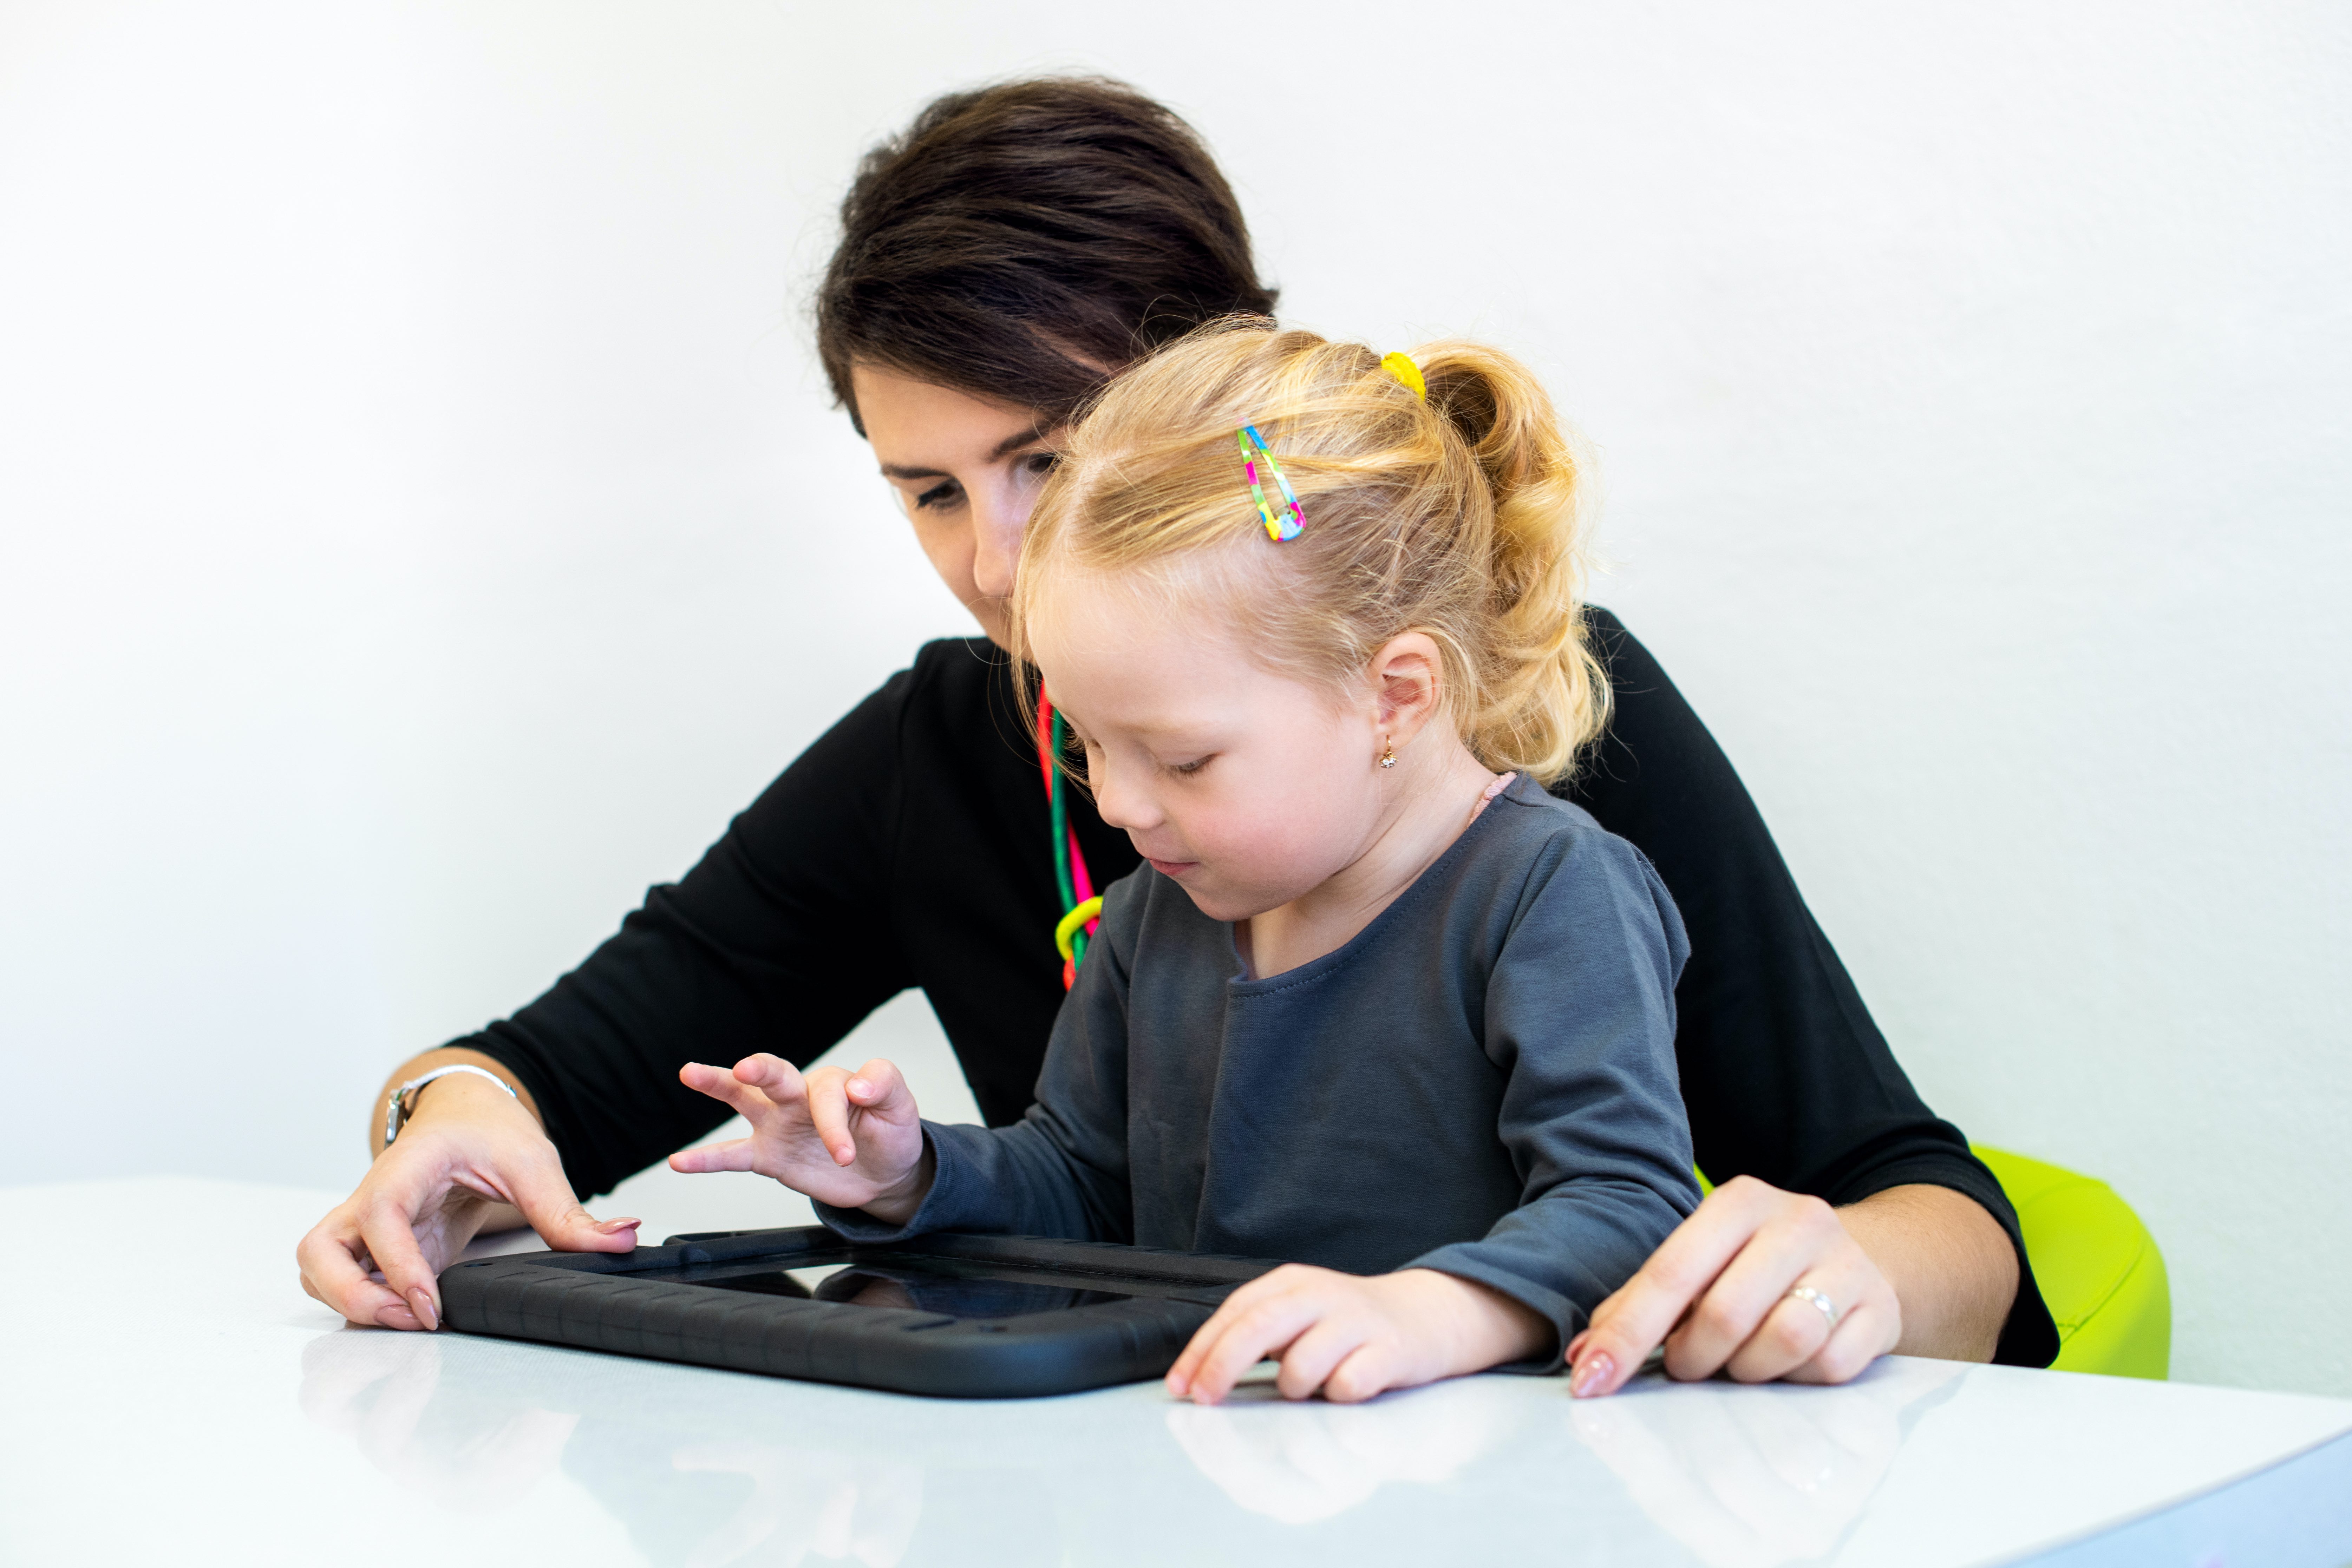 Therapist sitting with little girl, using a tablet together.